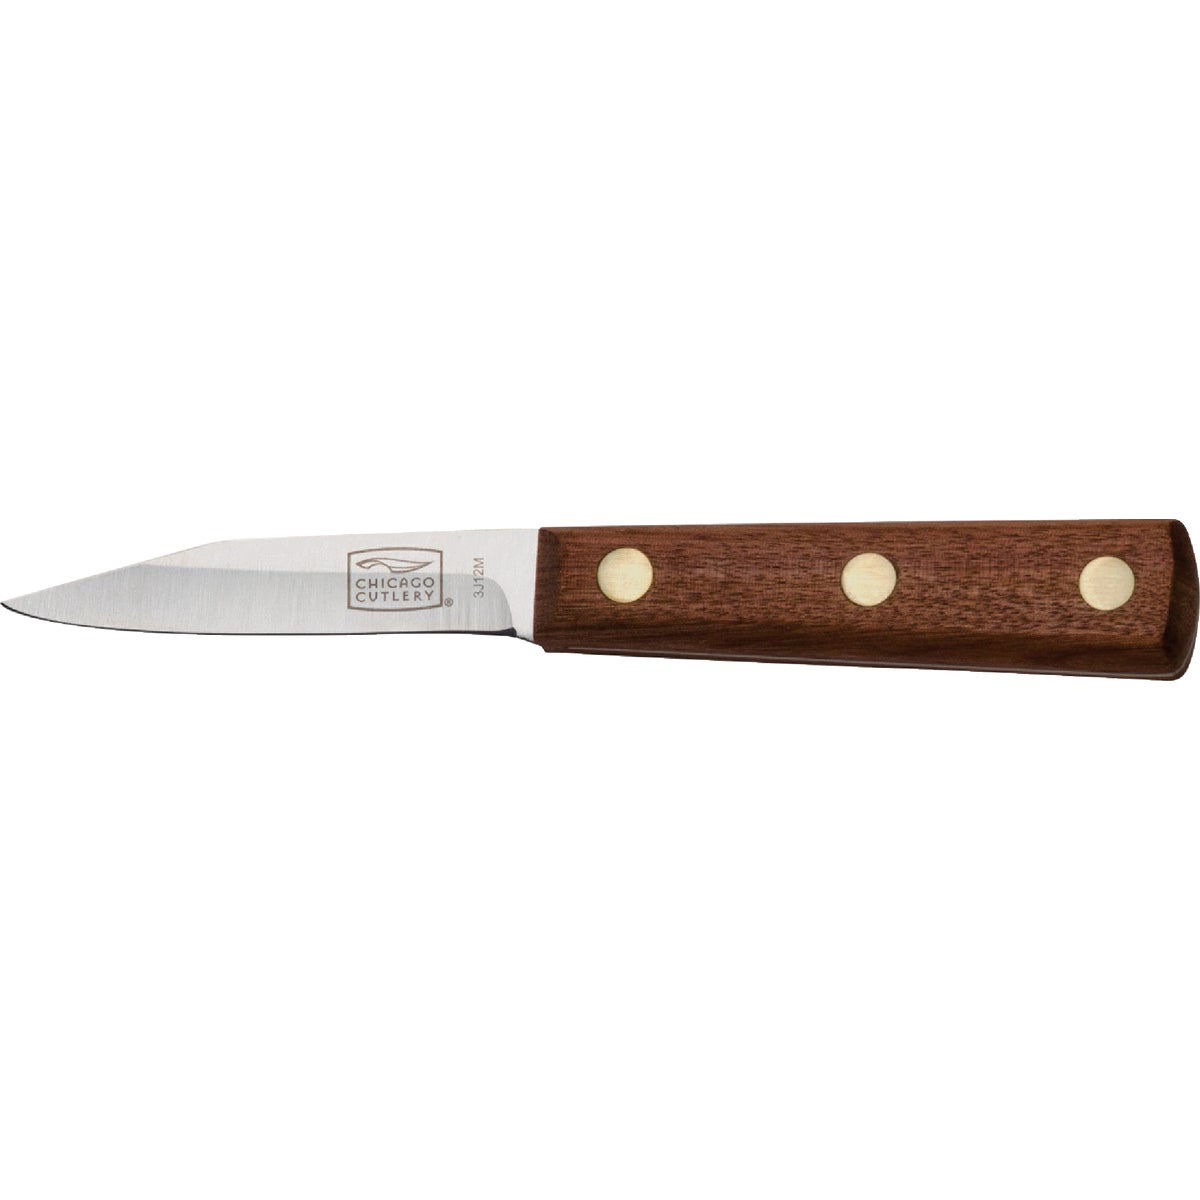 Chicago Cutlery 3-3/4-Inch Vent Paring Knife - Bunzl Processor Division